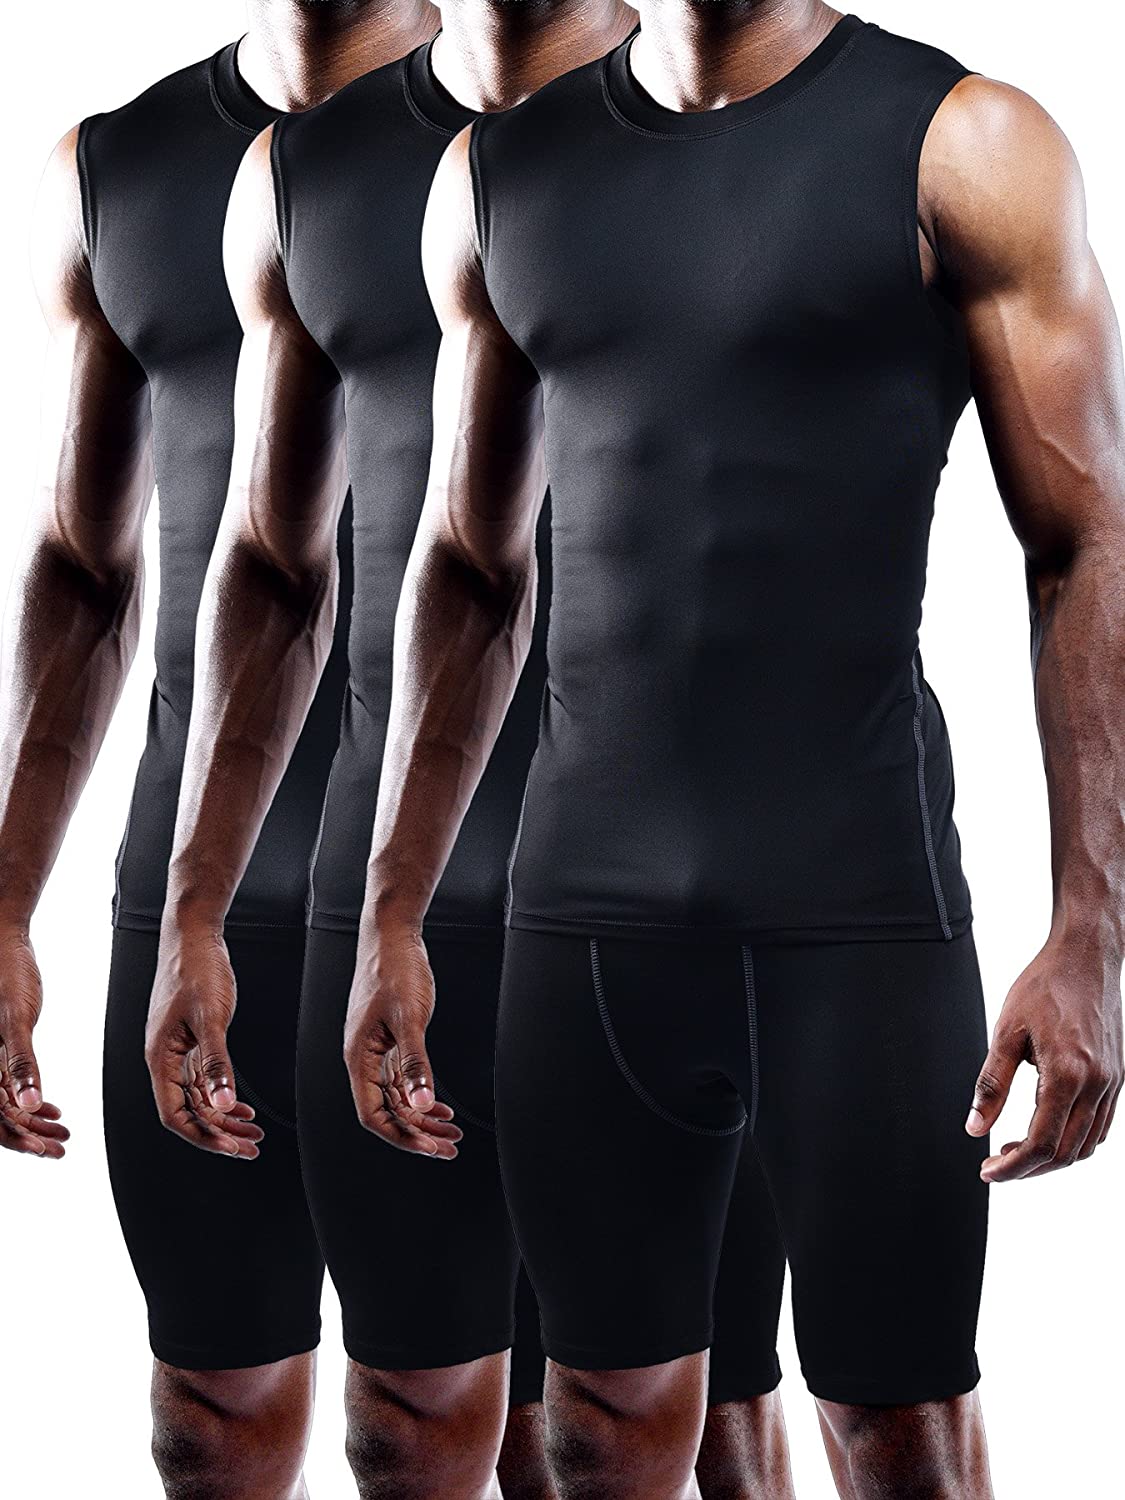 Neleus Mens 3 Pack Compression Athletic Muscle Sleeveless Tank Top